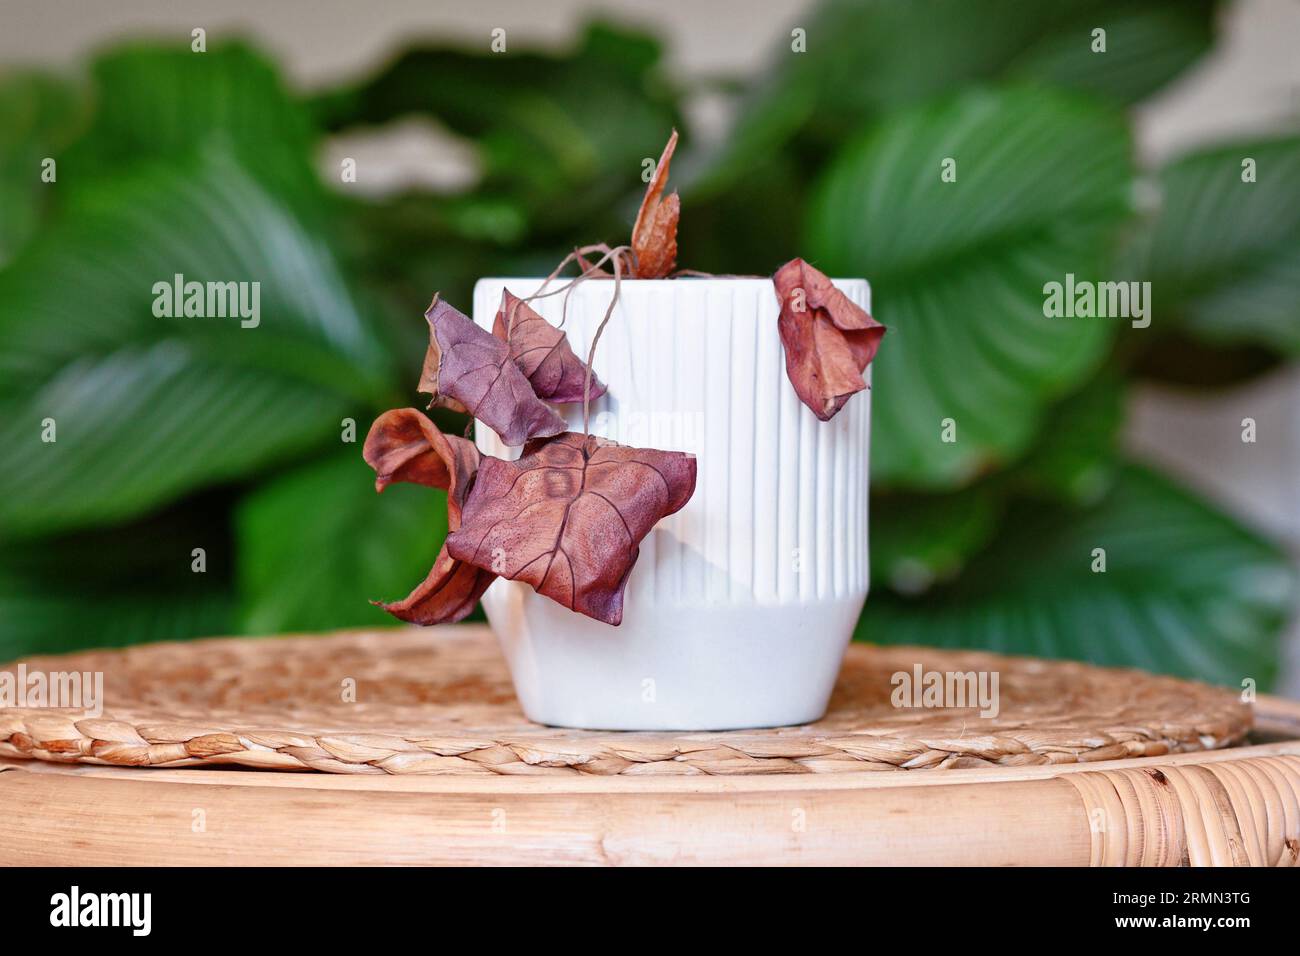 Neglected dying house plant with hanging dry leaves in white flower pot on table in living room Stock Photo